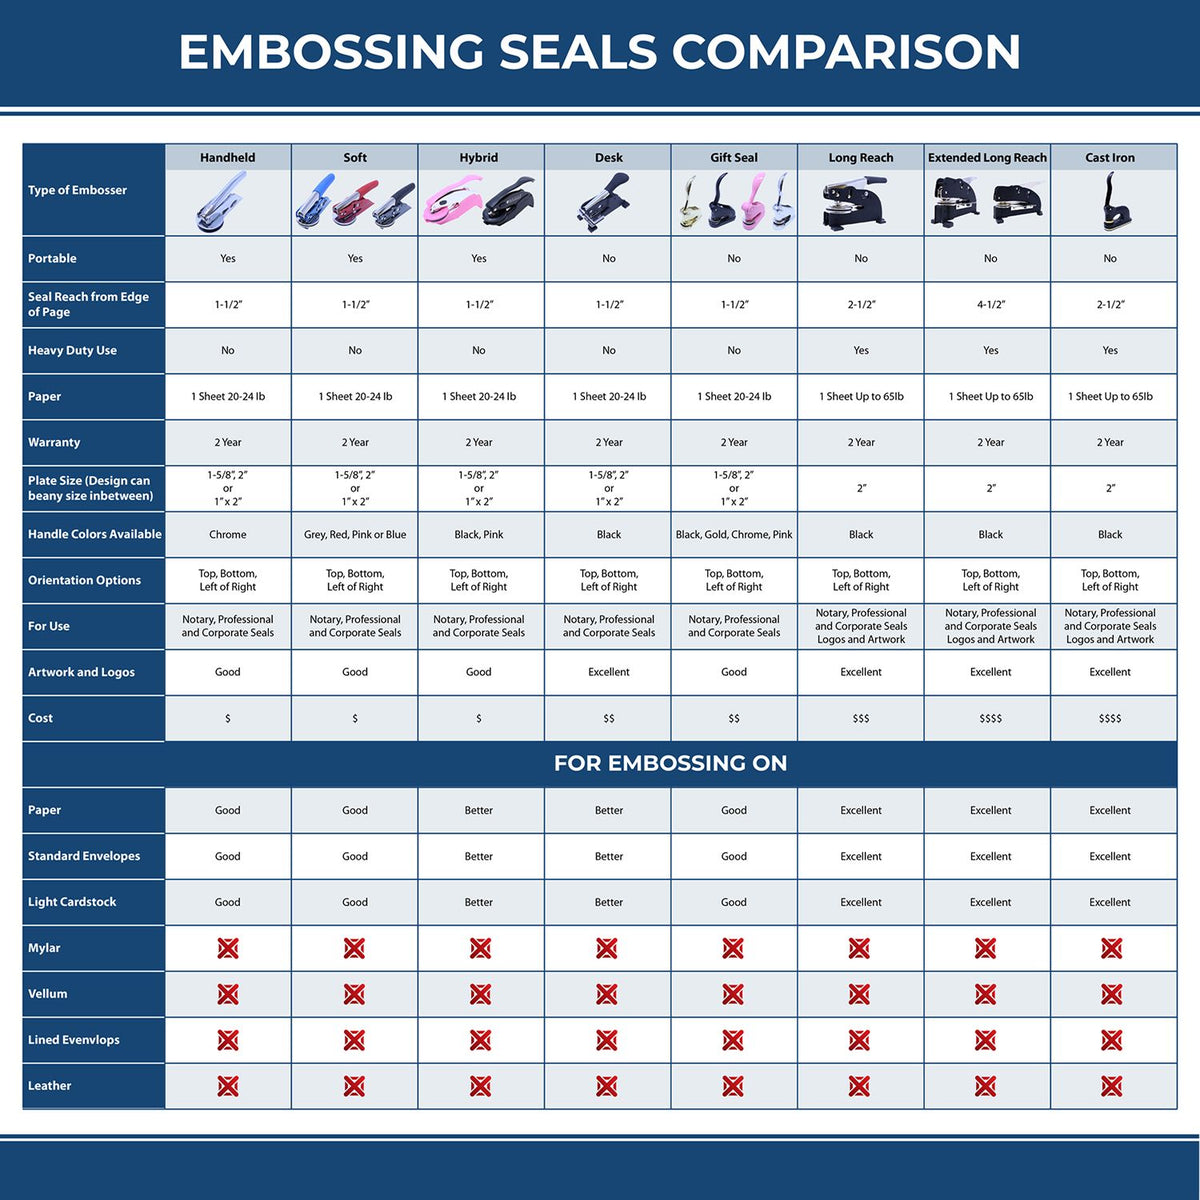 A comparison chart for the different types of mount models available for the Hybrid North Carolina Engineer Seal